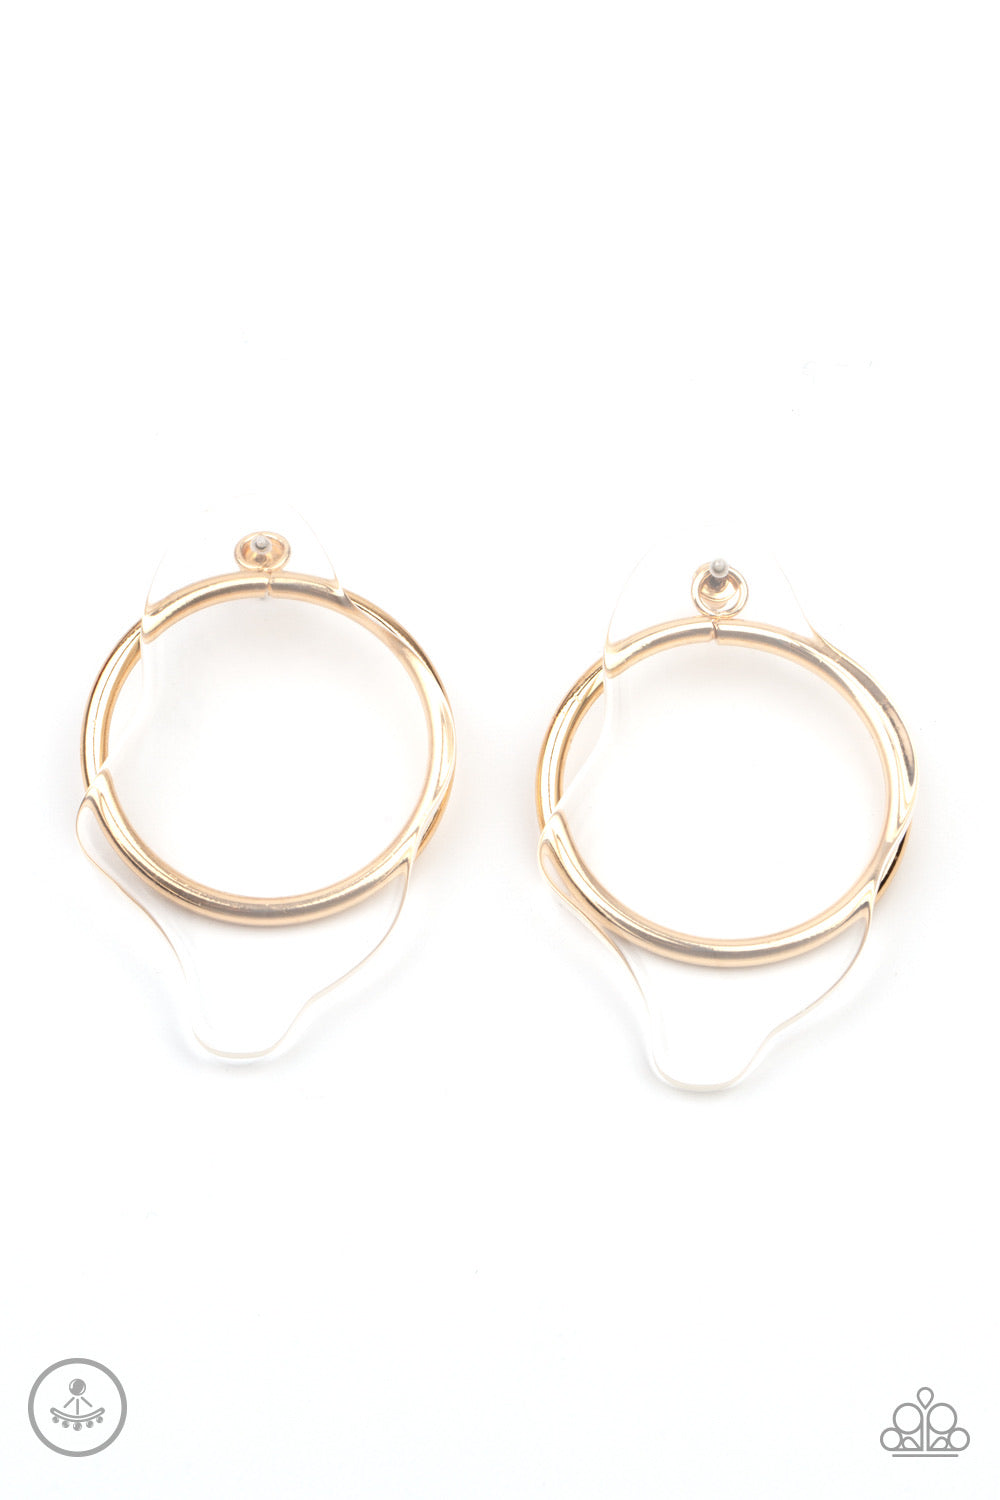 Clear The Way - Gold Post Earrings - Paparazzi Accessories